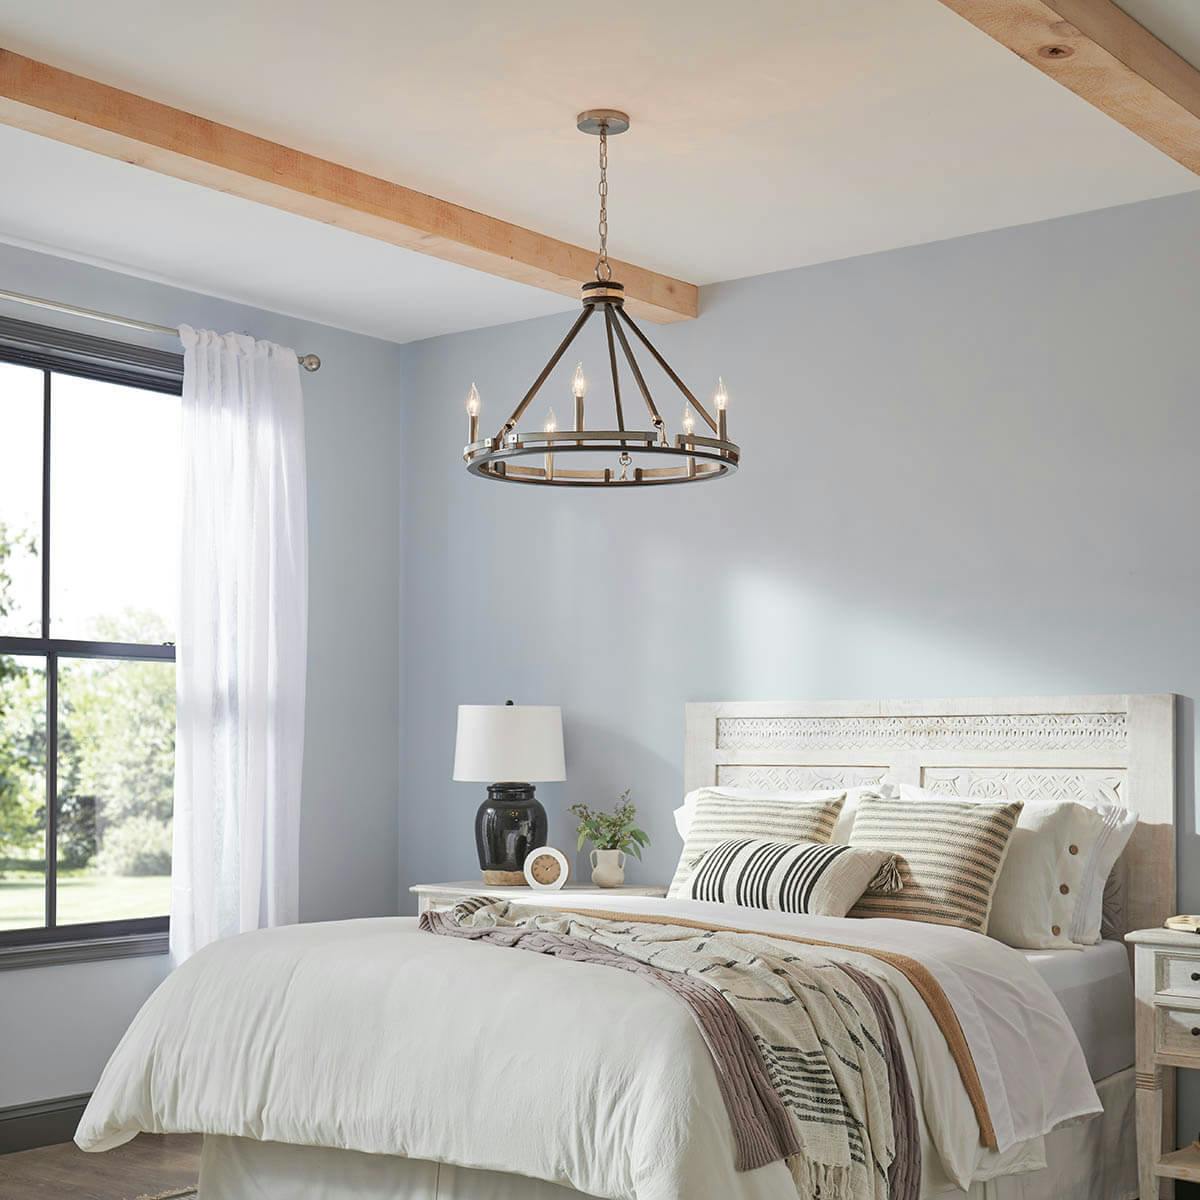 Day time Bedroom with Stetton chandelier 82333